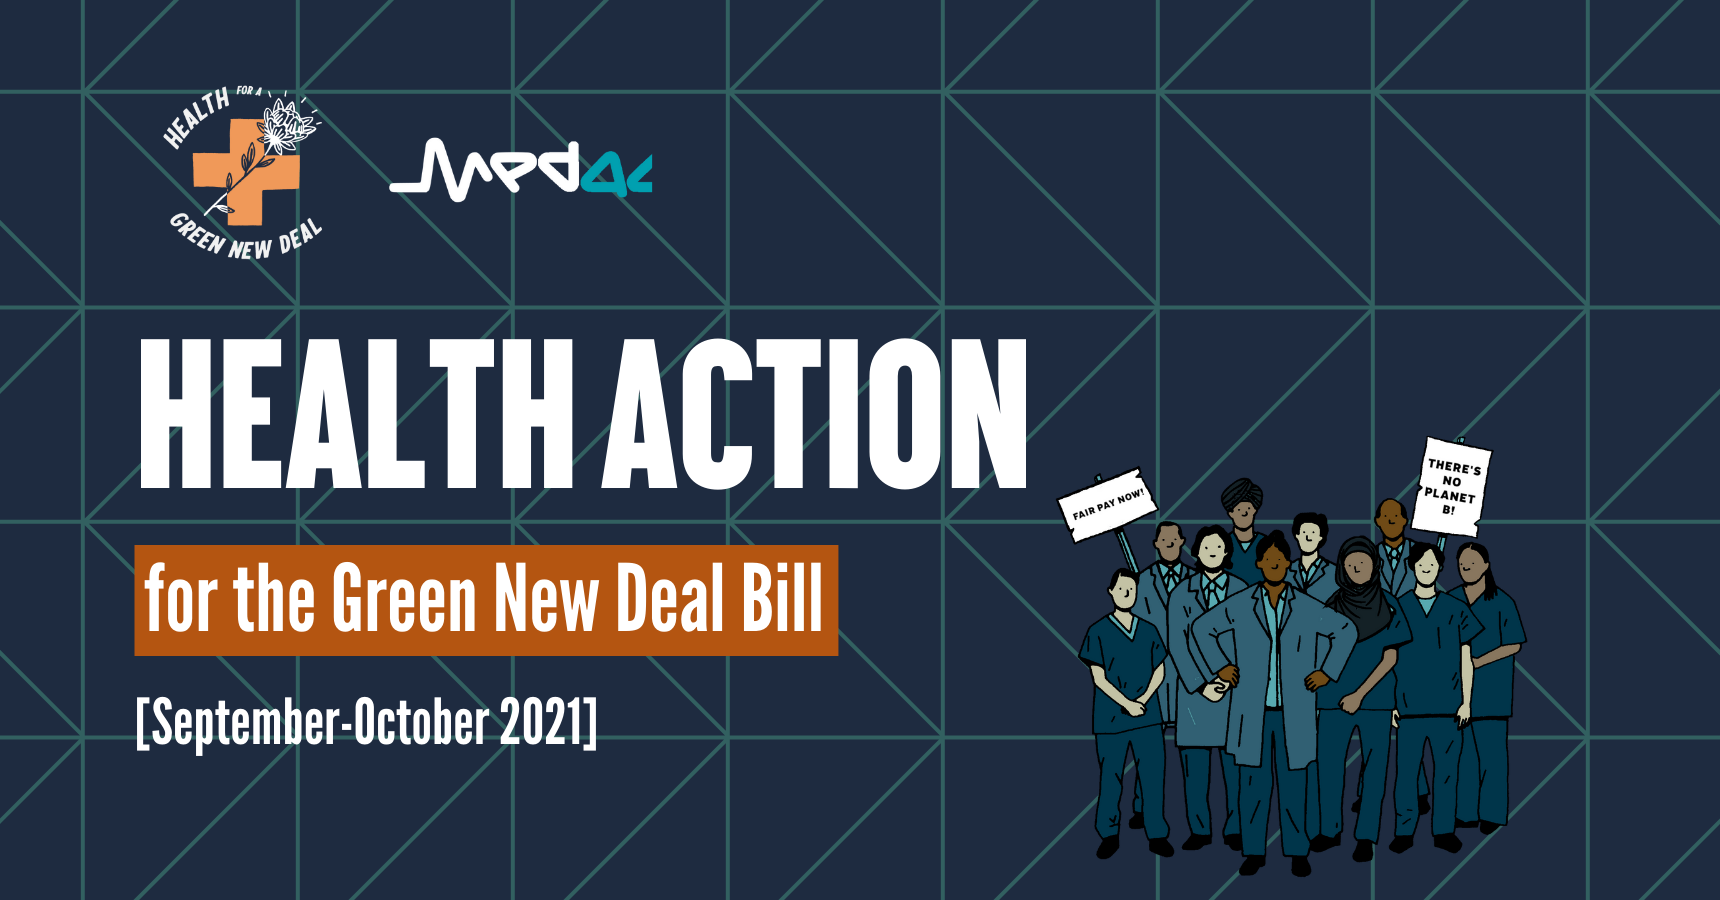 Health Action for the Green New Deal Bill